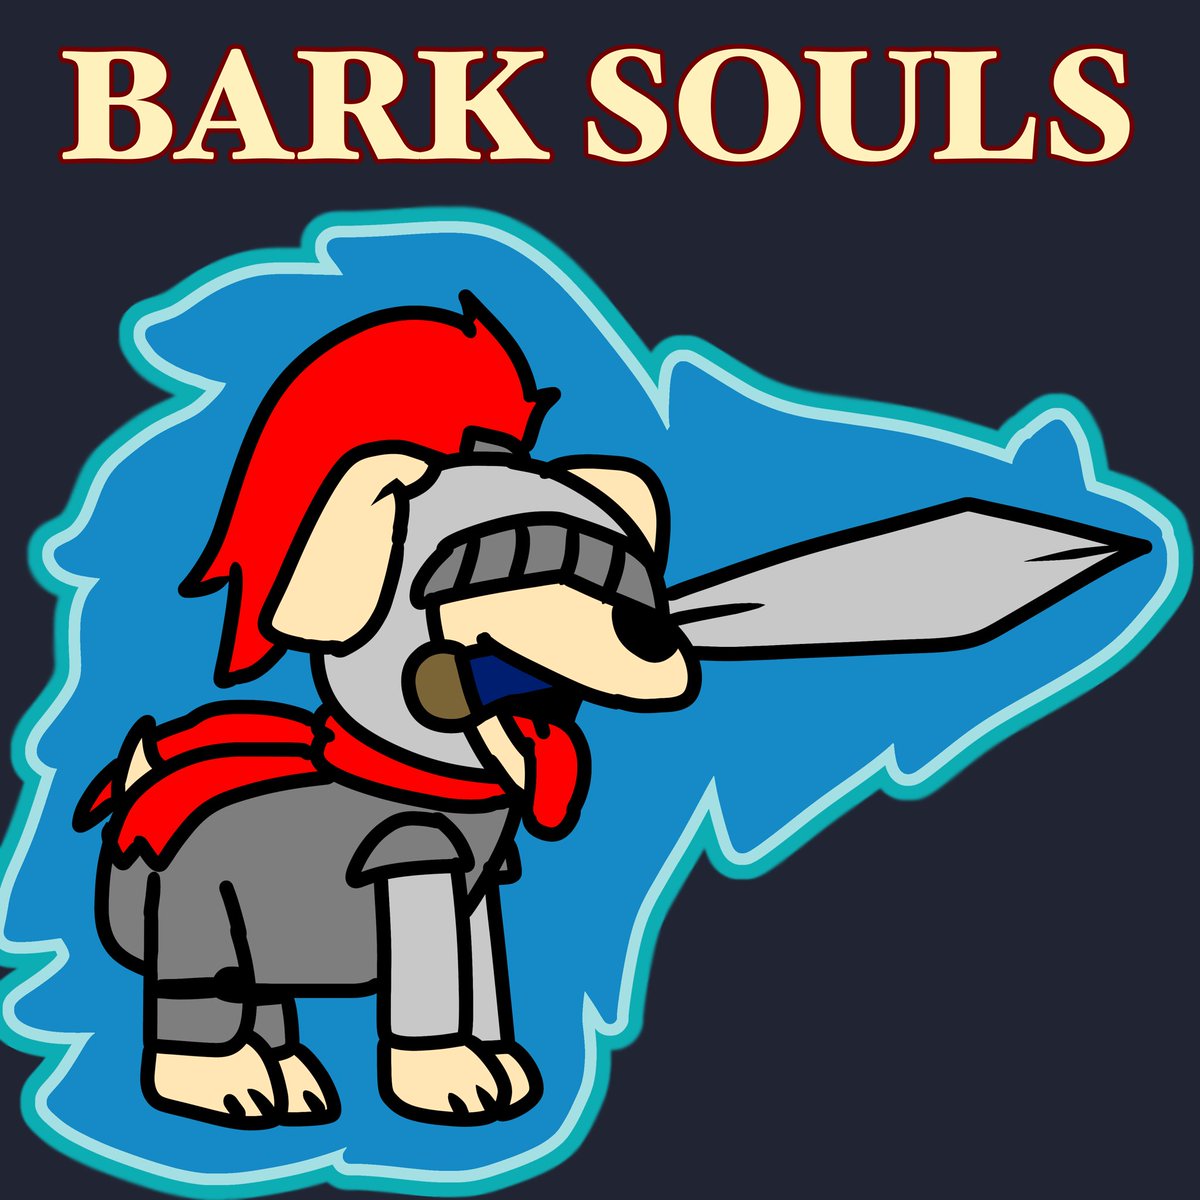 You’ve heard of Dark Souls Now get ready for Bark Souls (Thanks to my oomfie @Sylvetora for the idea)